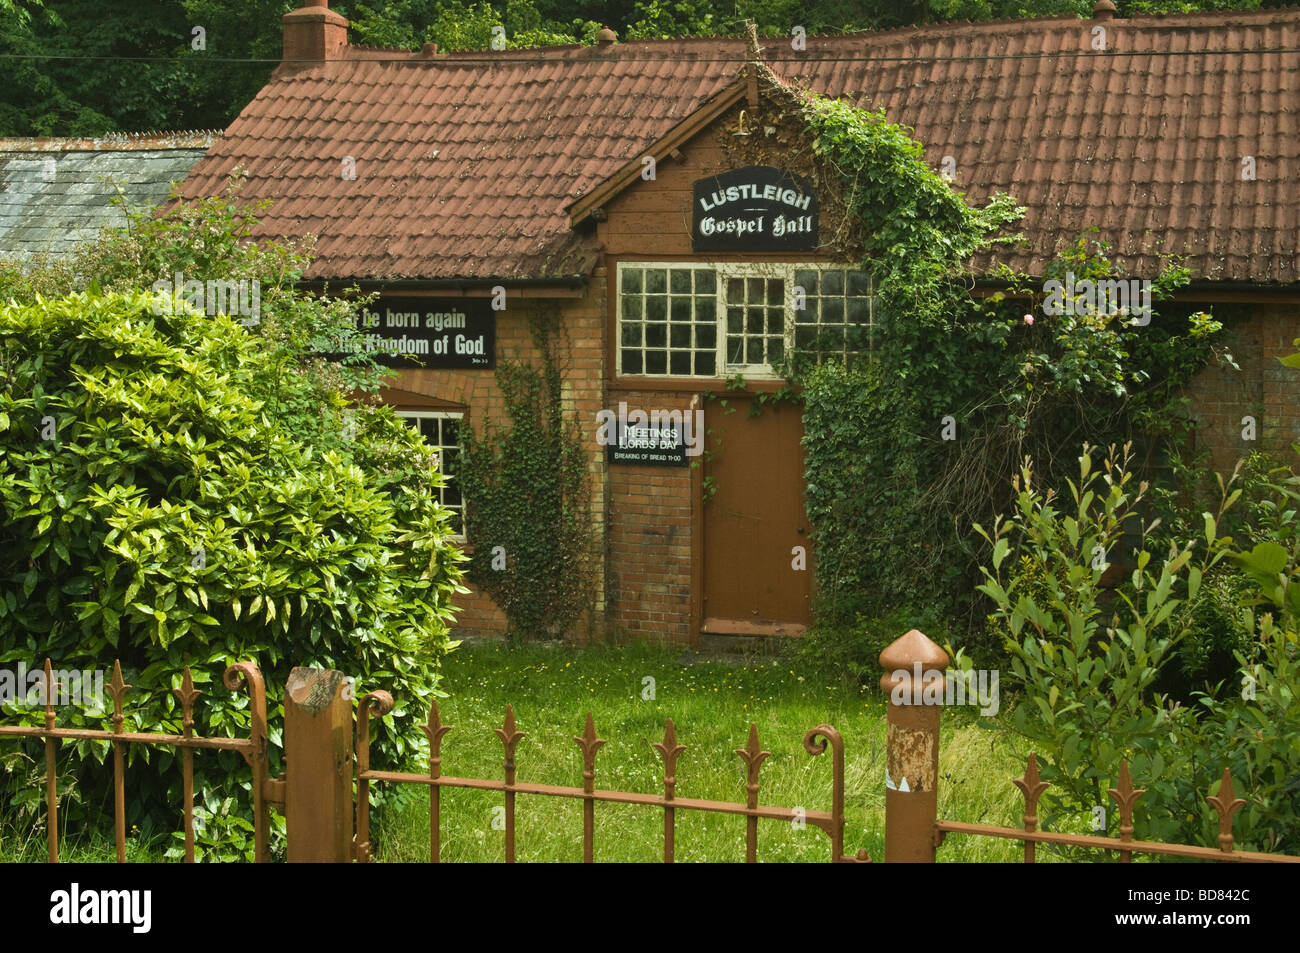 Old Gospel Hall at Lustleigh, a small pretty Devon village on the east side of the Dartmoor National Park Stock Photo